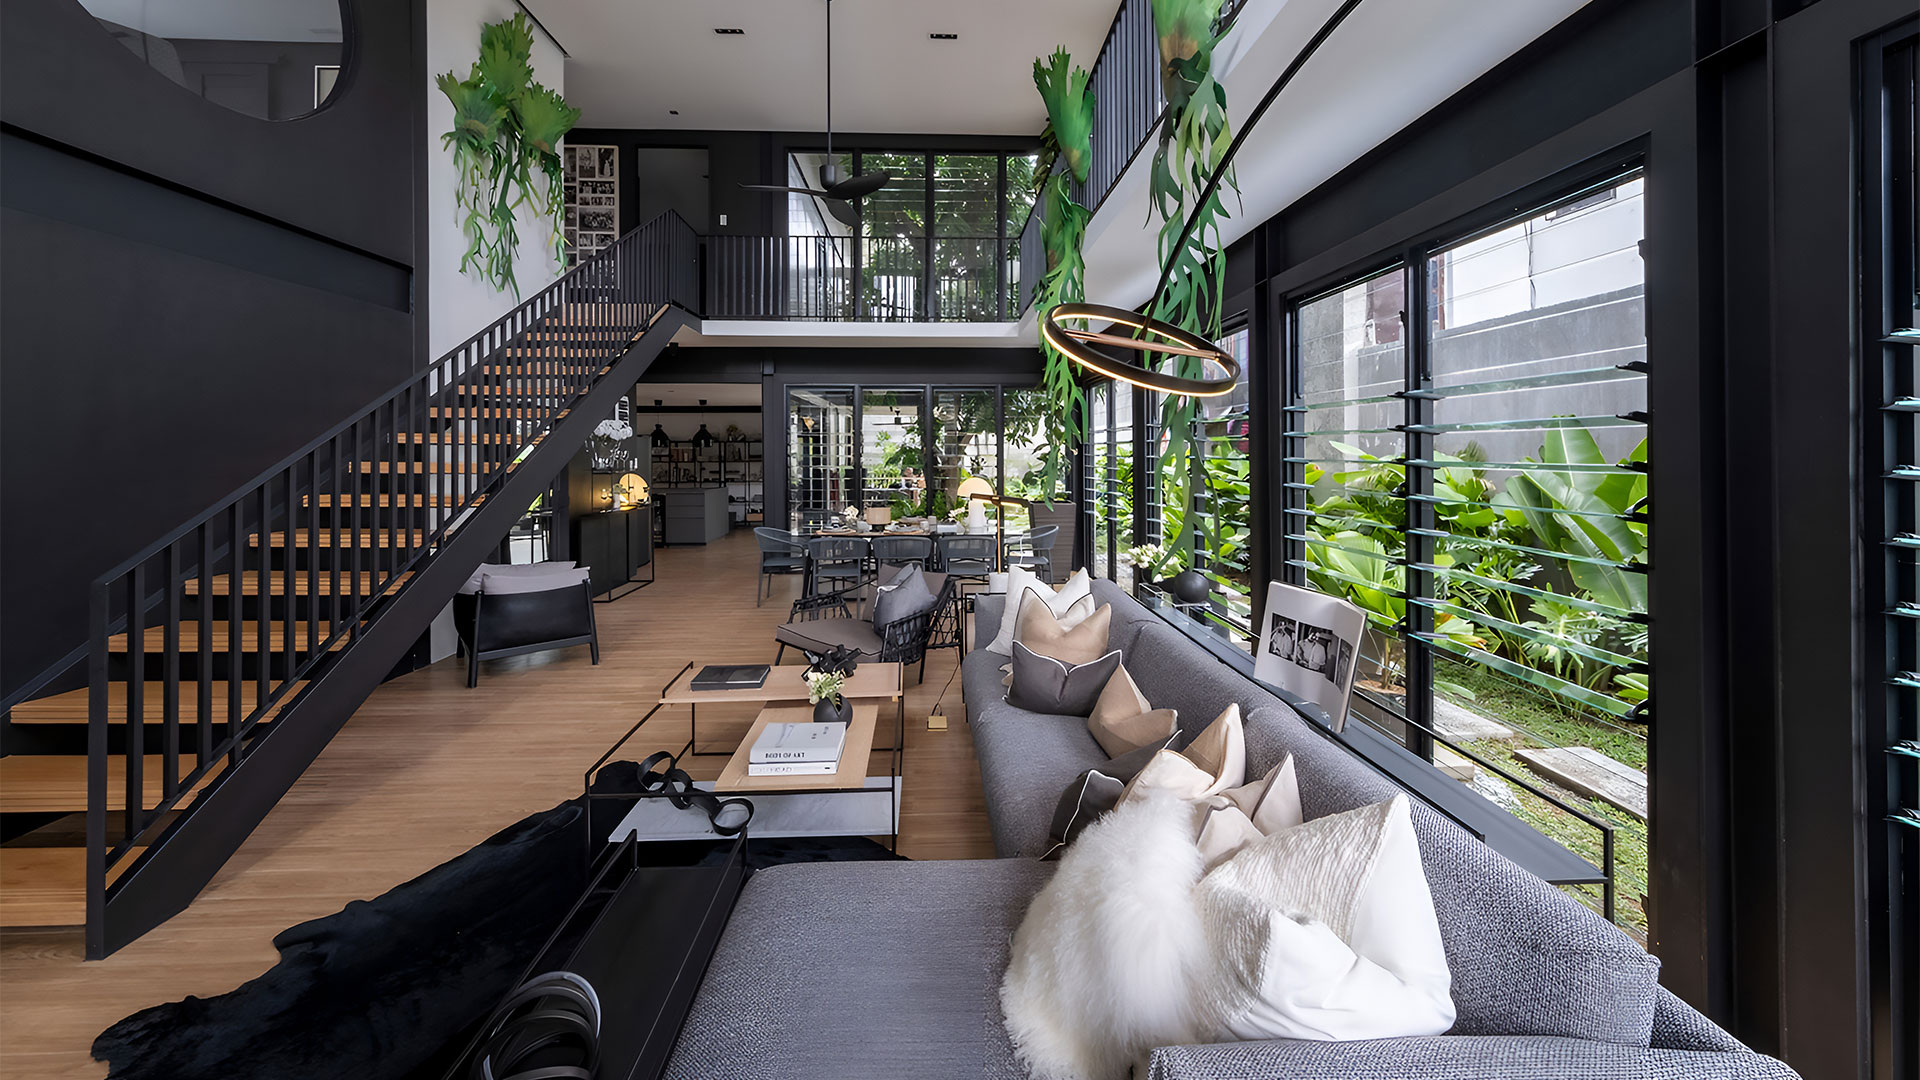 Brutal Beauty: Stark modernism is softened by nature – including an indoor tree – in this tranquil Manila house 